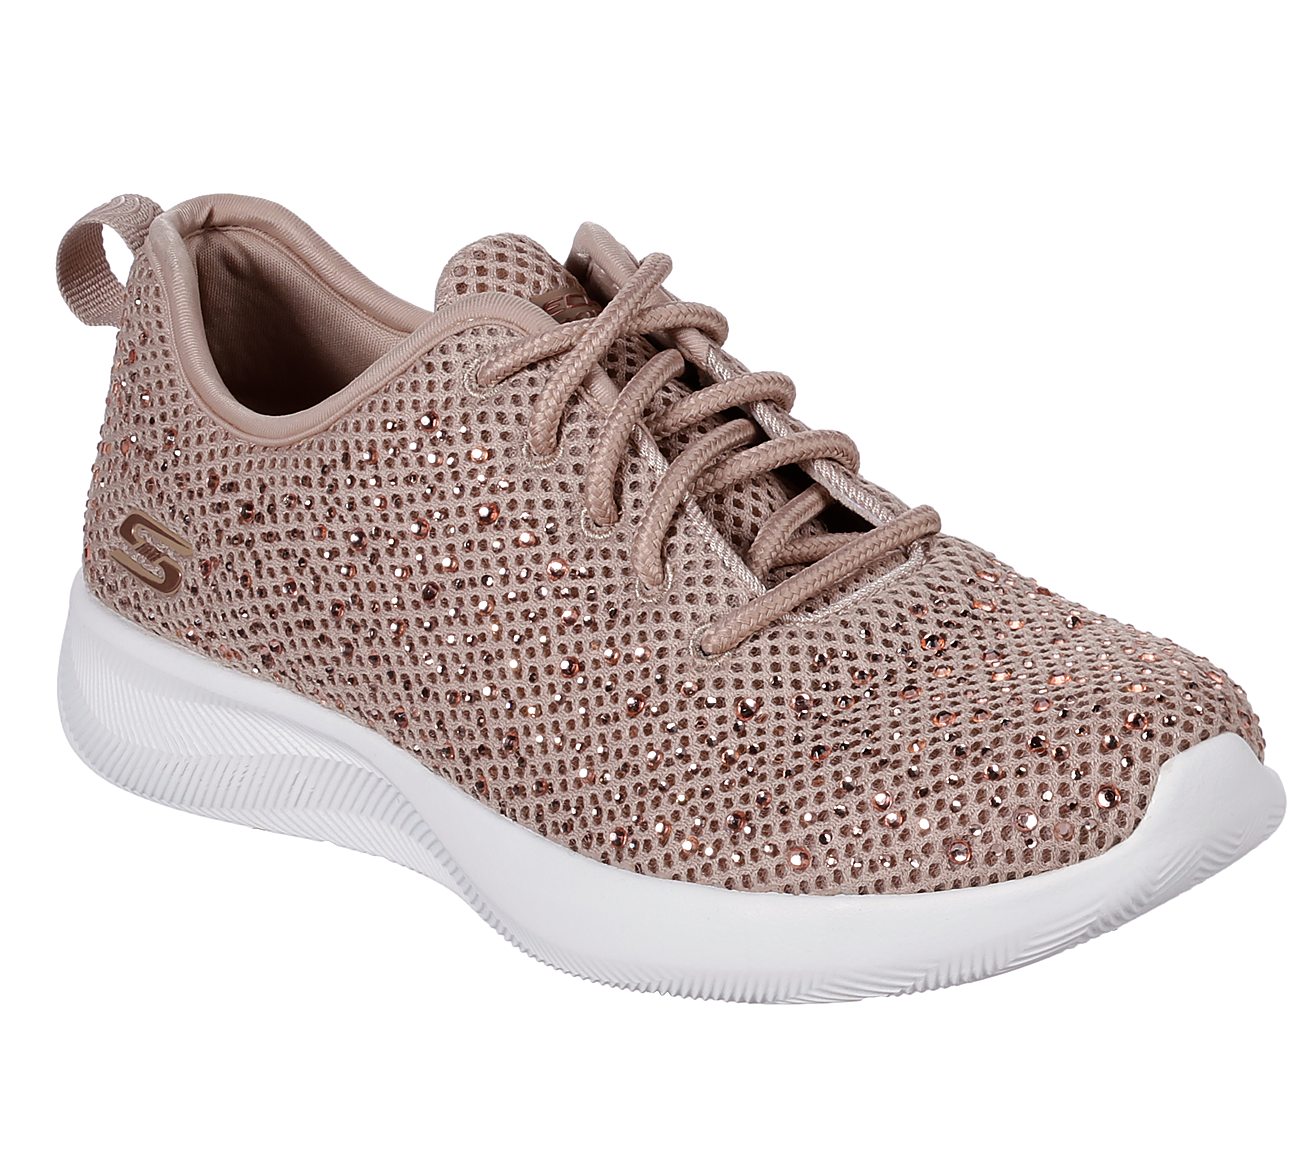 skechers lace up sneakers mujer espana